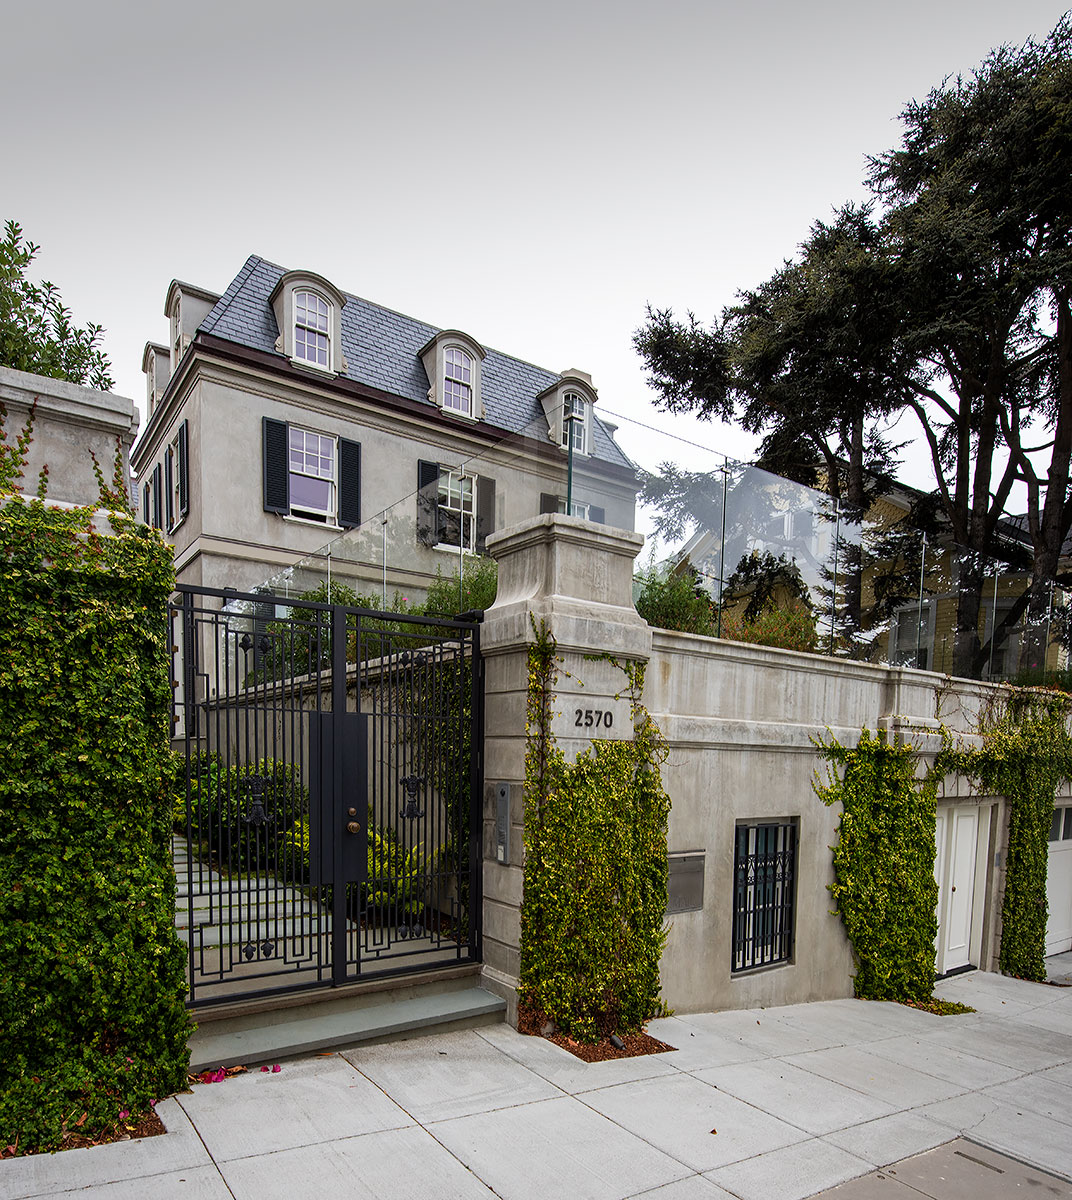 2570 Jackson Street in Pacific Heights, designed by Albert L. Farr, built 1916